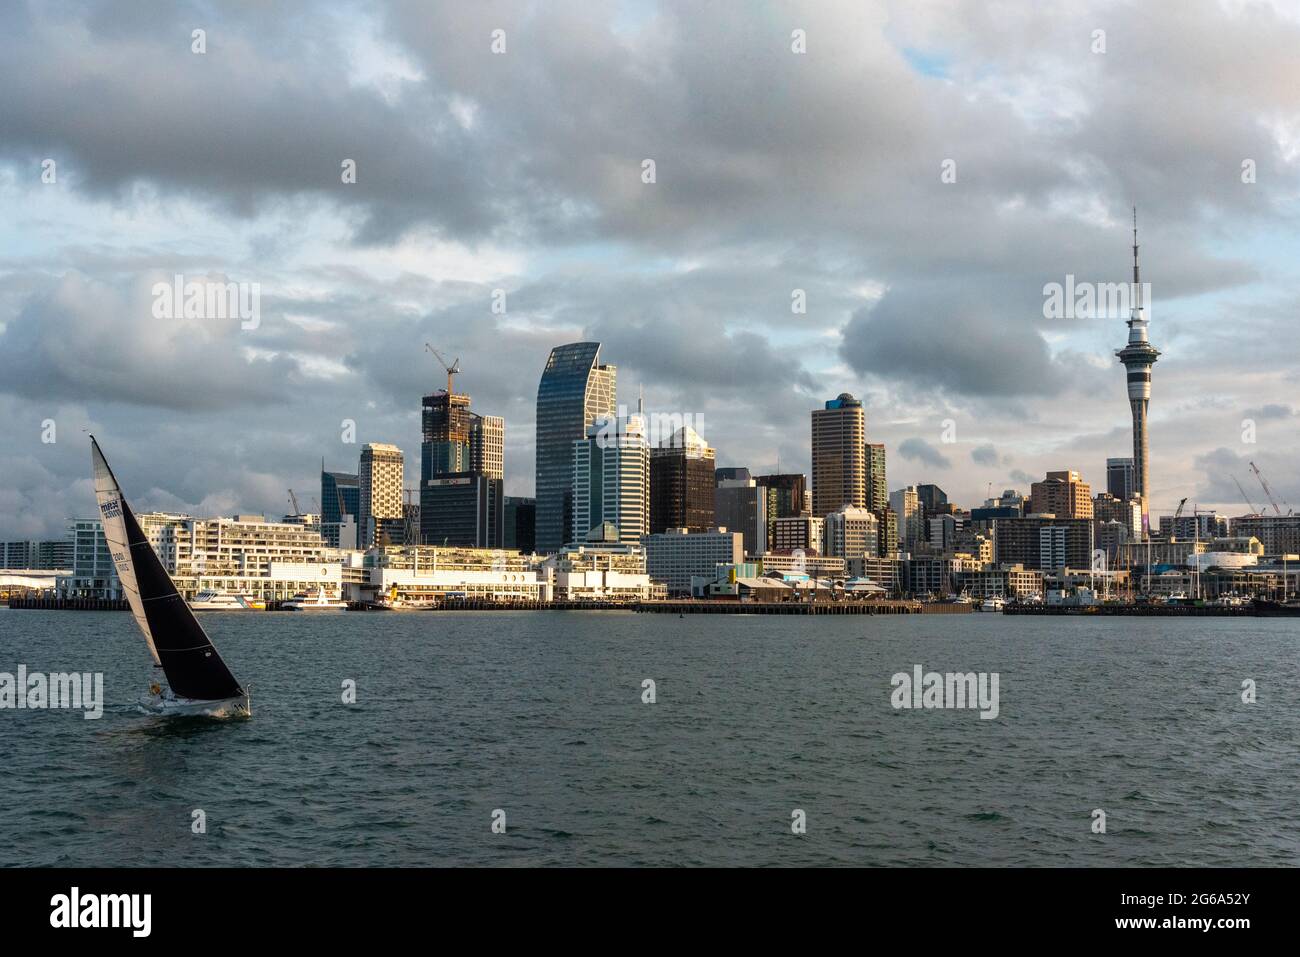 Famous skyline of Auckland Central Business District during sunset, people anjoying the warm summer evening on their sailboats, New Zealand Stock Photo